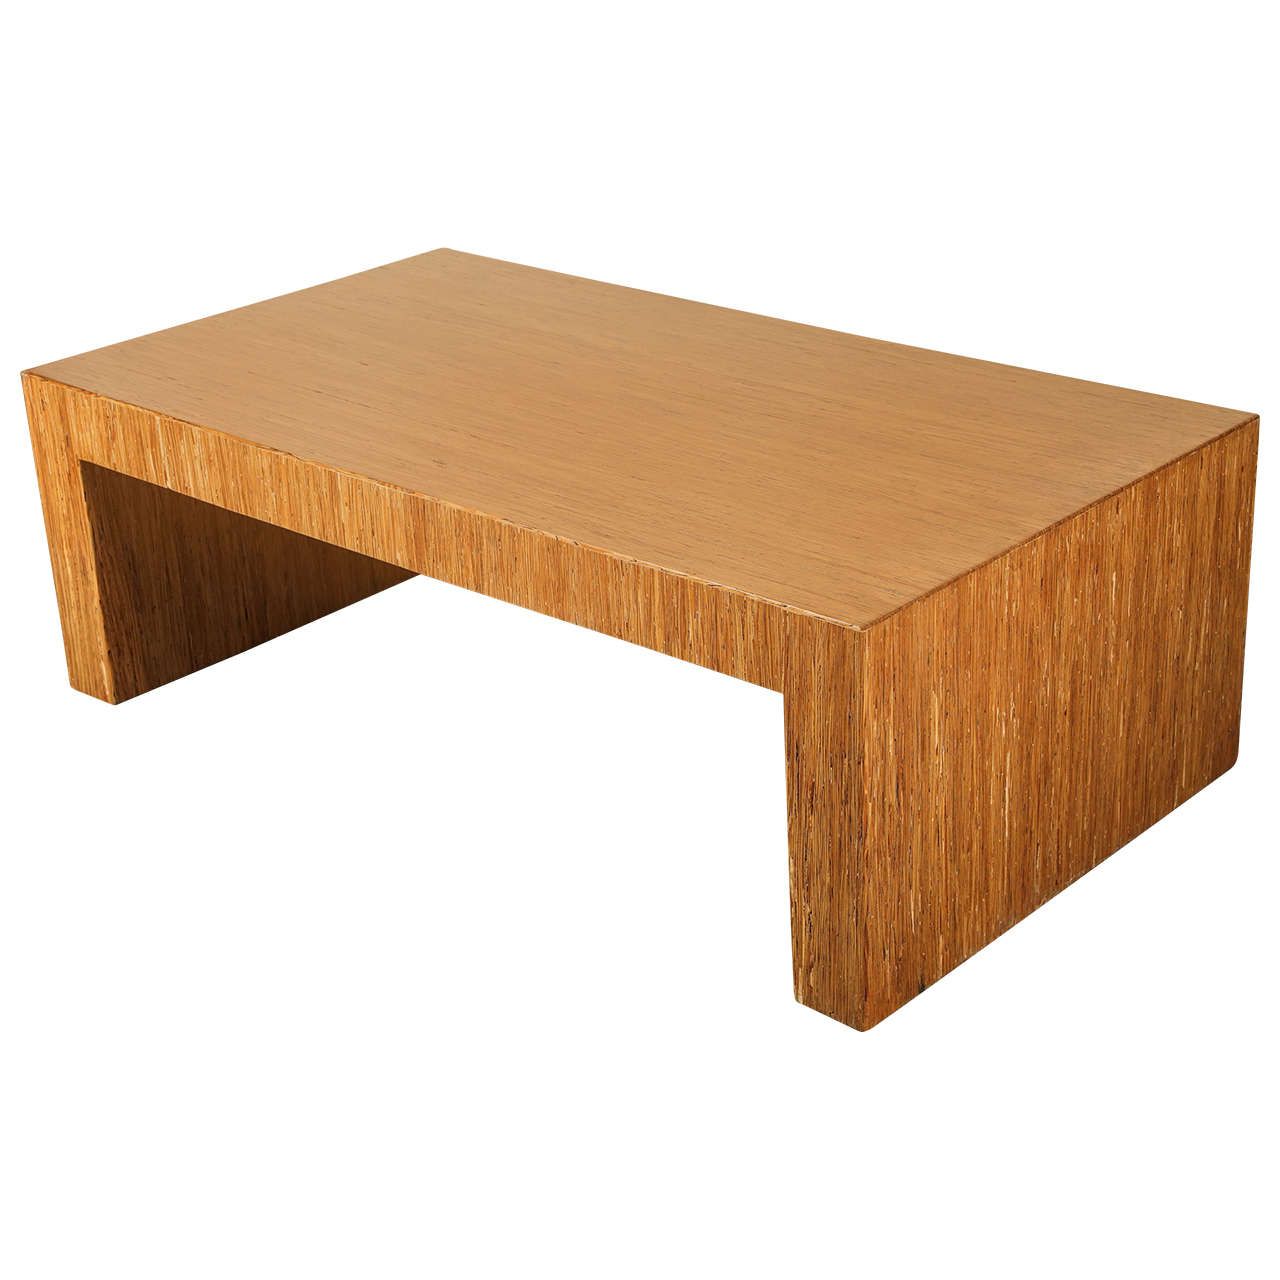 Simple Minimalist Coffee Table With Striated Wood Veneer At 1stdibs Within Most Recent Simple Design Coffee Tables (View 4 of 15)